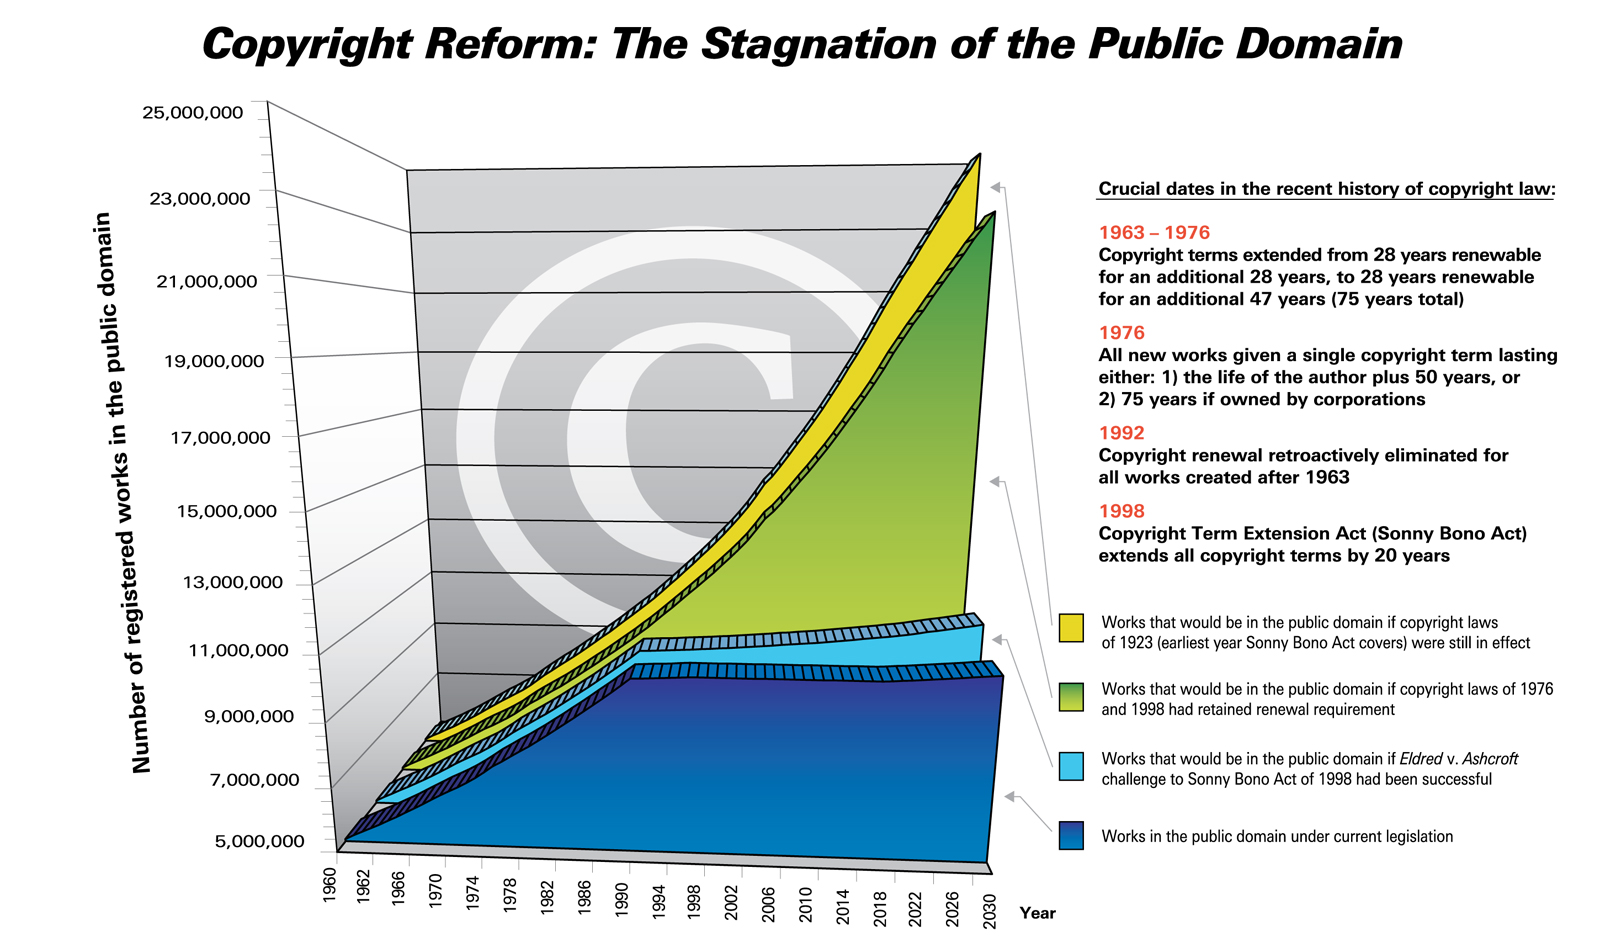 Front image of a postcard mapping out crucial dates in copyright law.